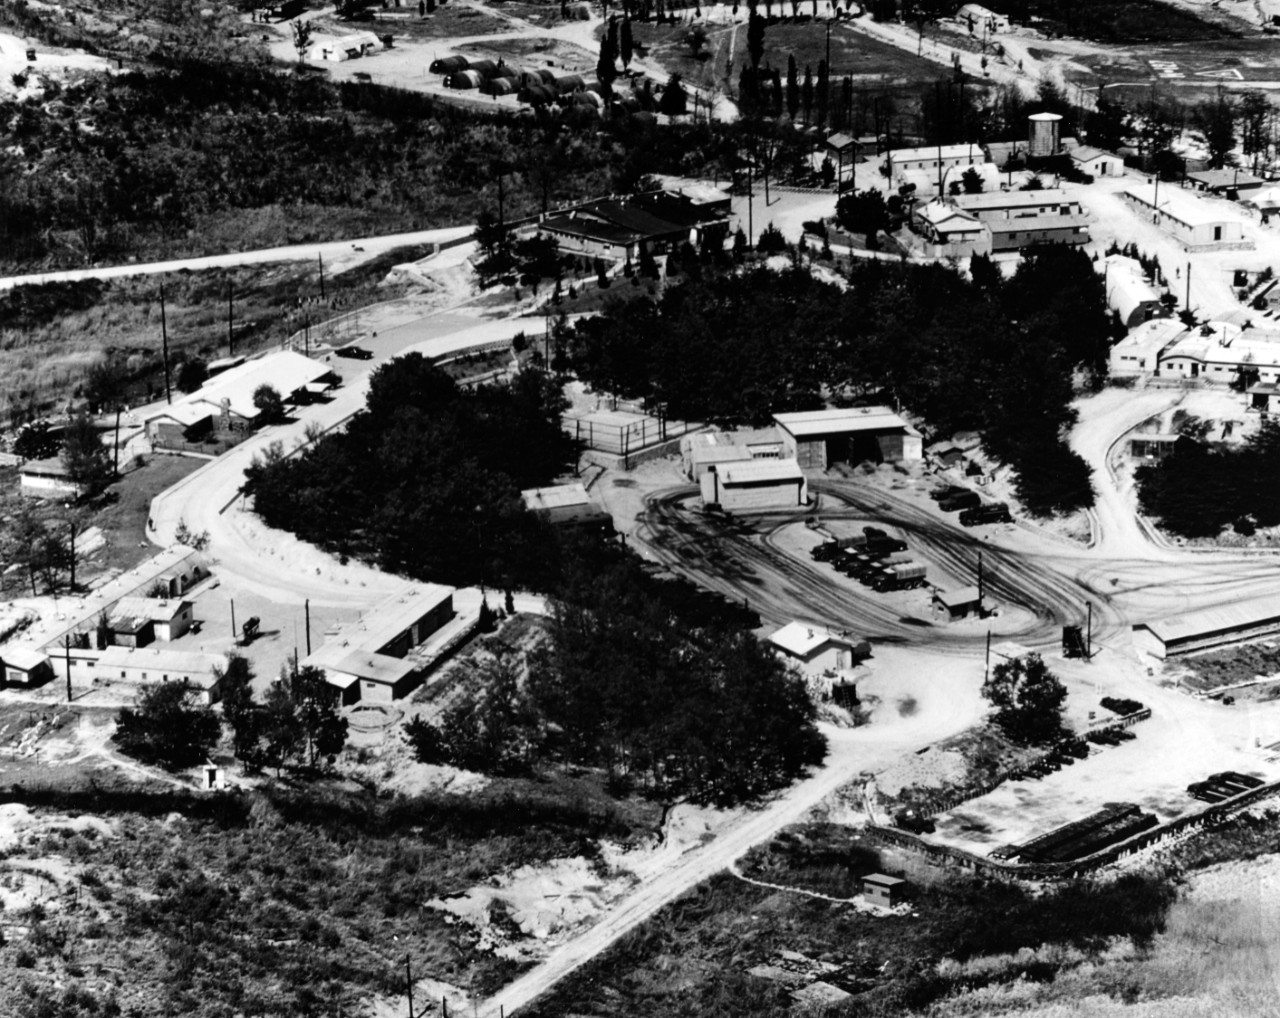 An aerial view of the United Nations Advance Camp at Panmunjom, Korea.